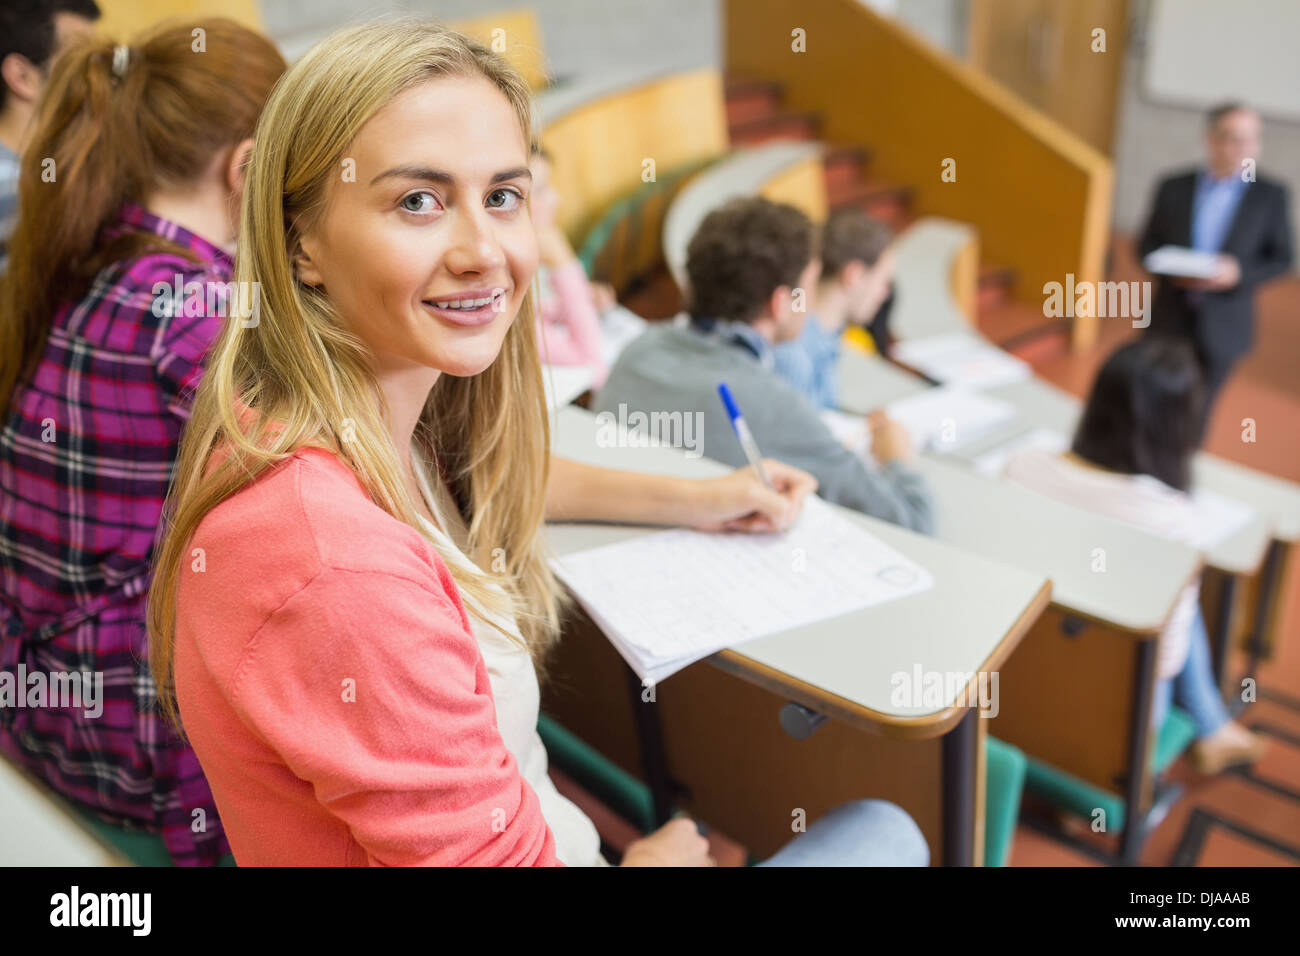 Smiling female with students and teacher at lecture hall Stock Photo